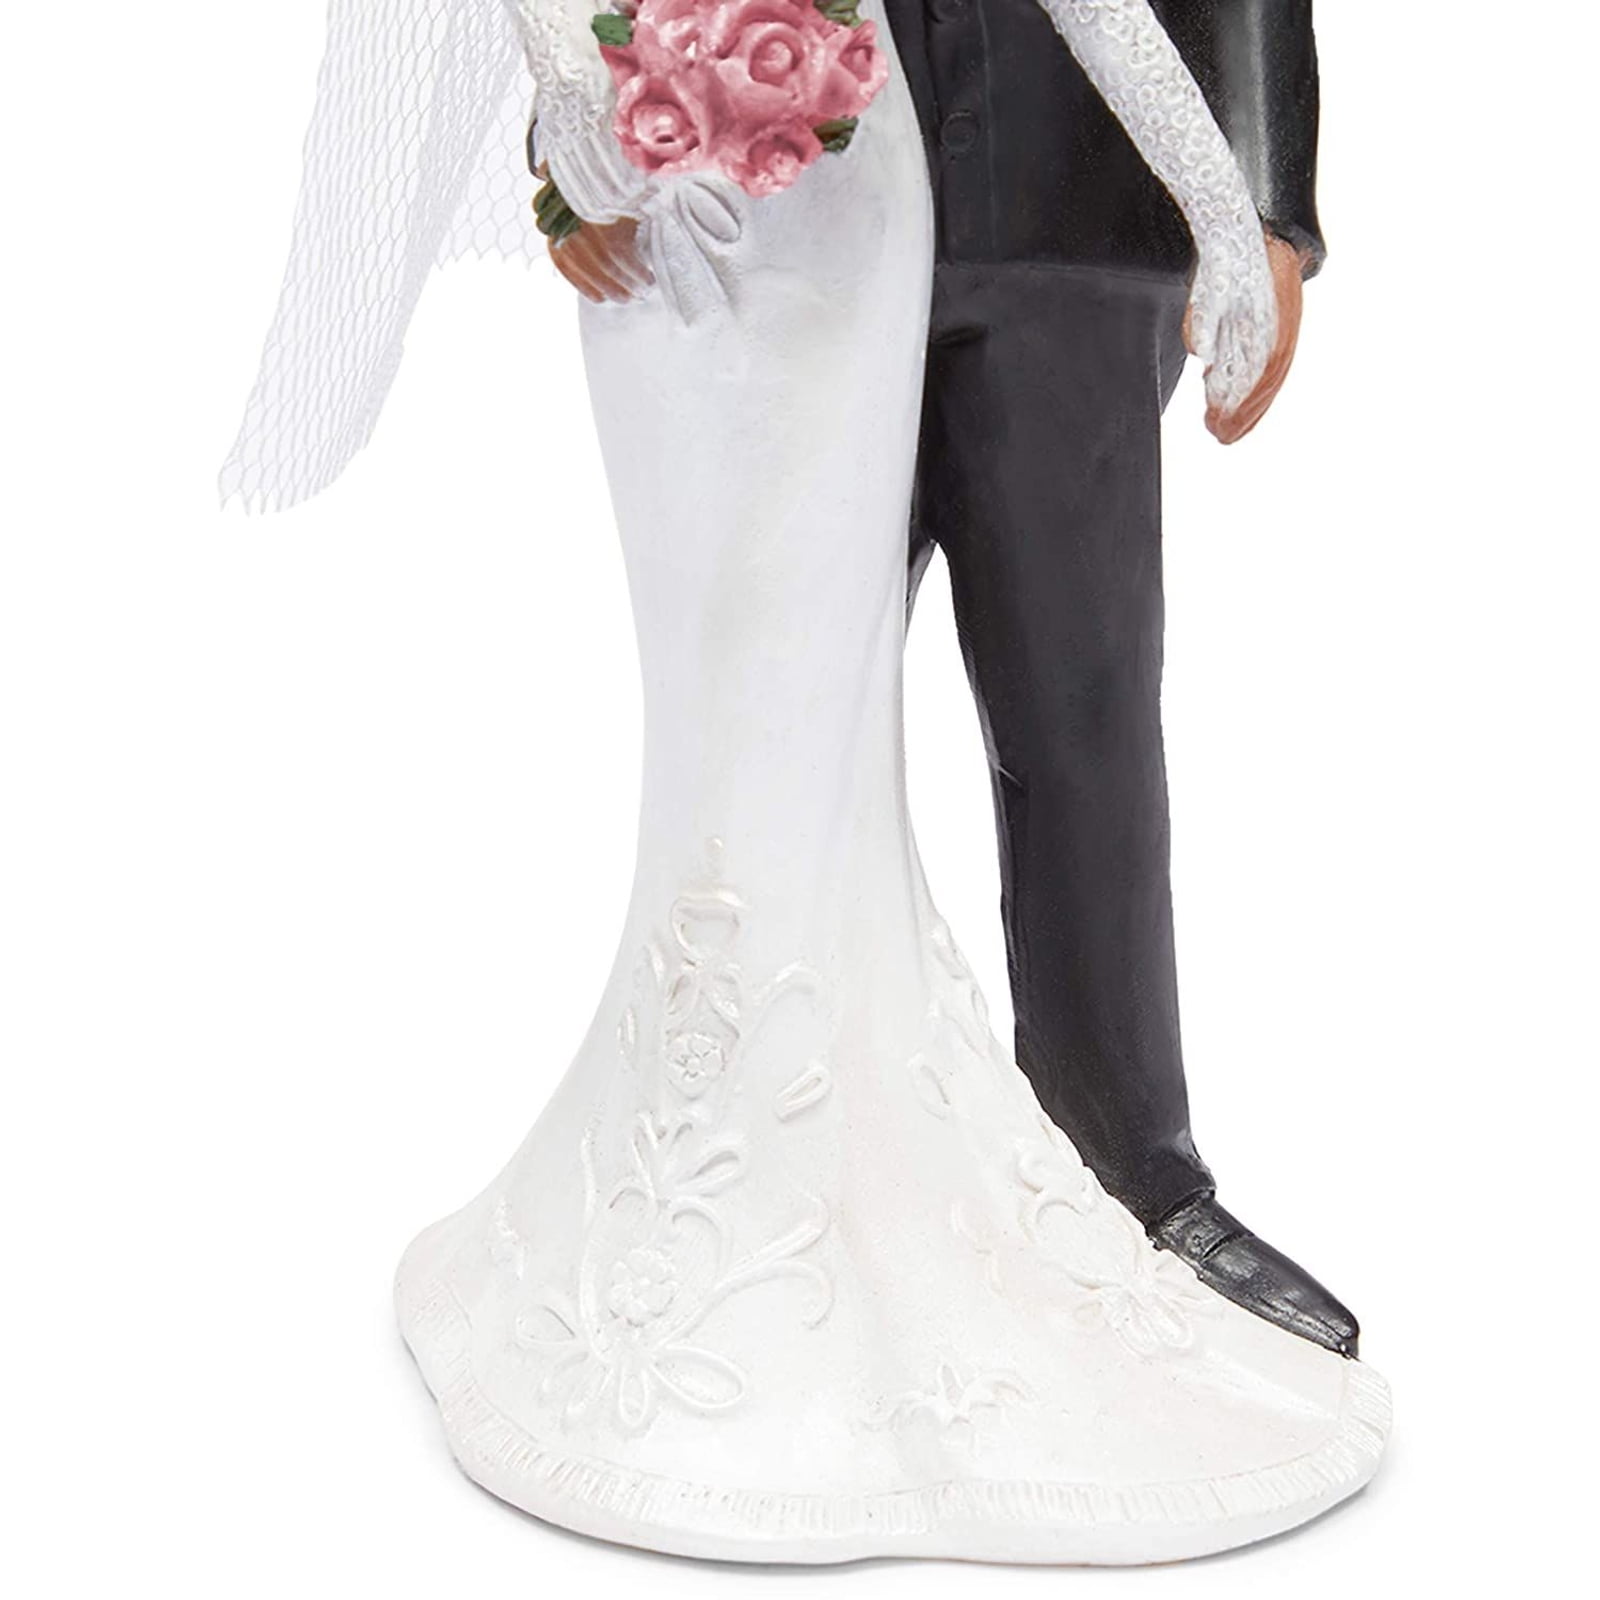 African American Wedding Cake Toppers Bride and Groom Figurine for Party Supplies, 5 x 1.9 in. - Walmart.com